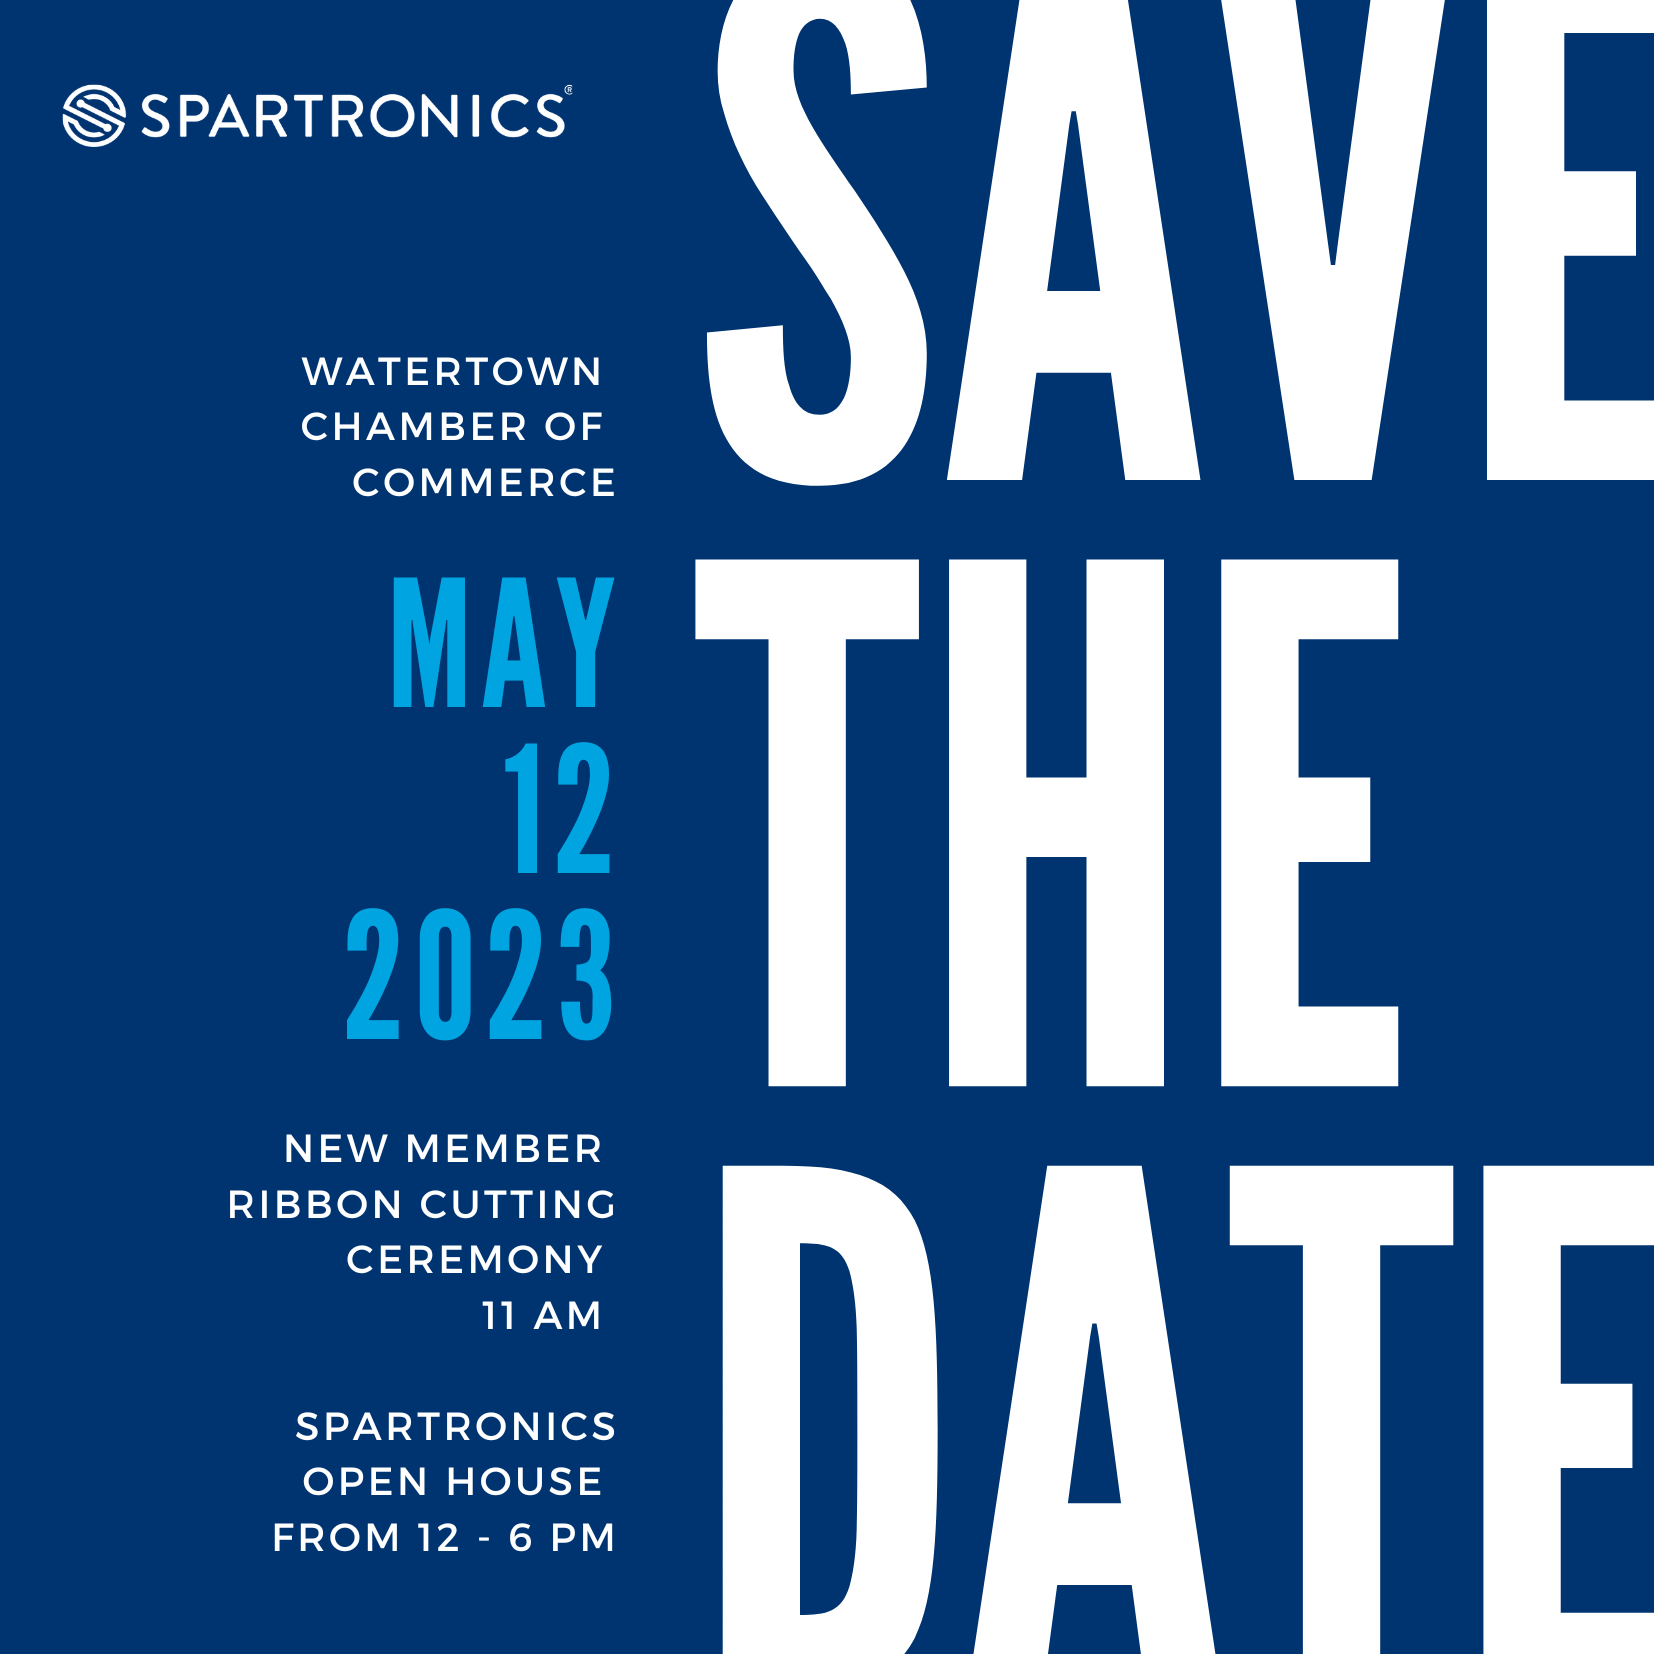 Spartronics Watertown Chamber of Commerce Ribbon Cutting Ceremony